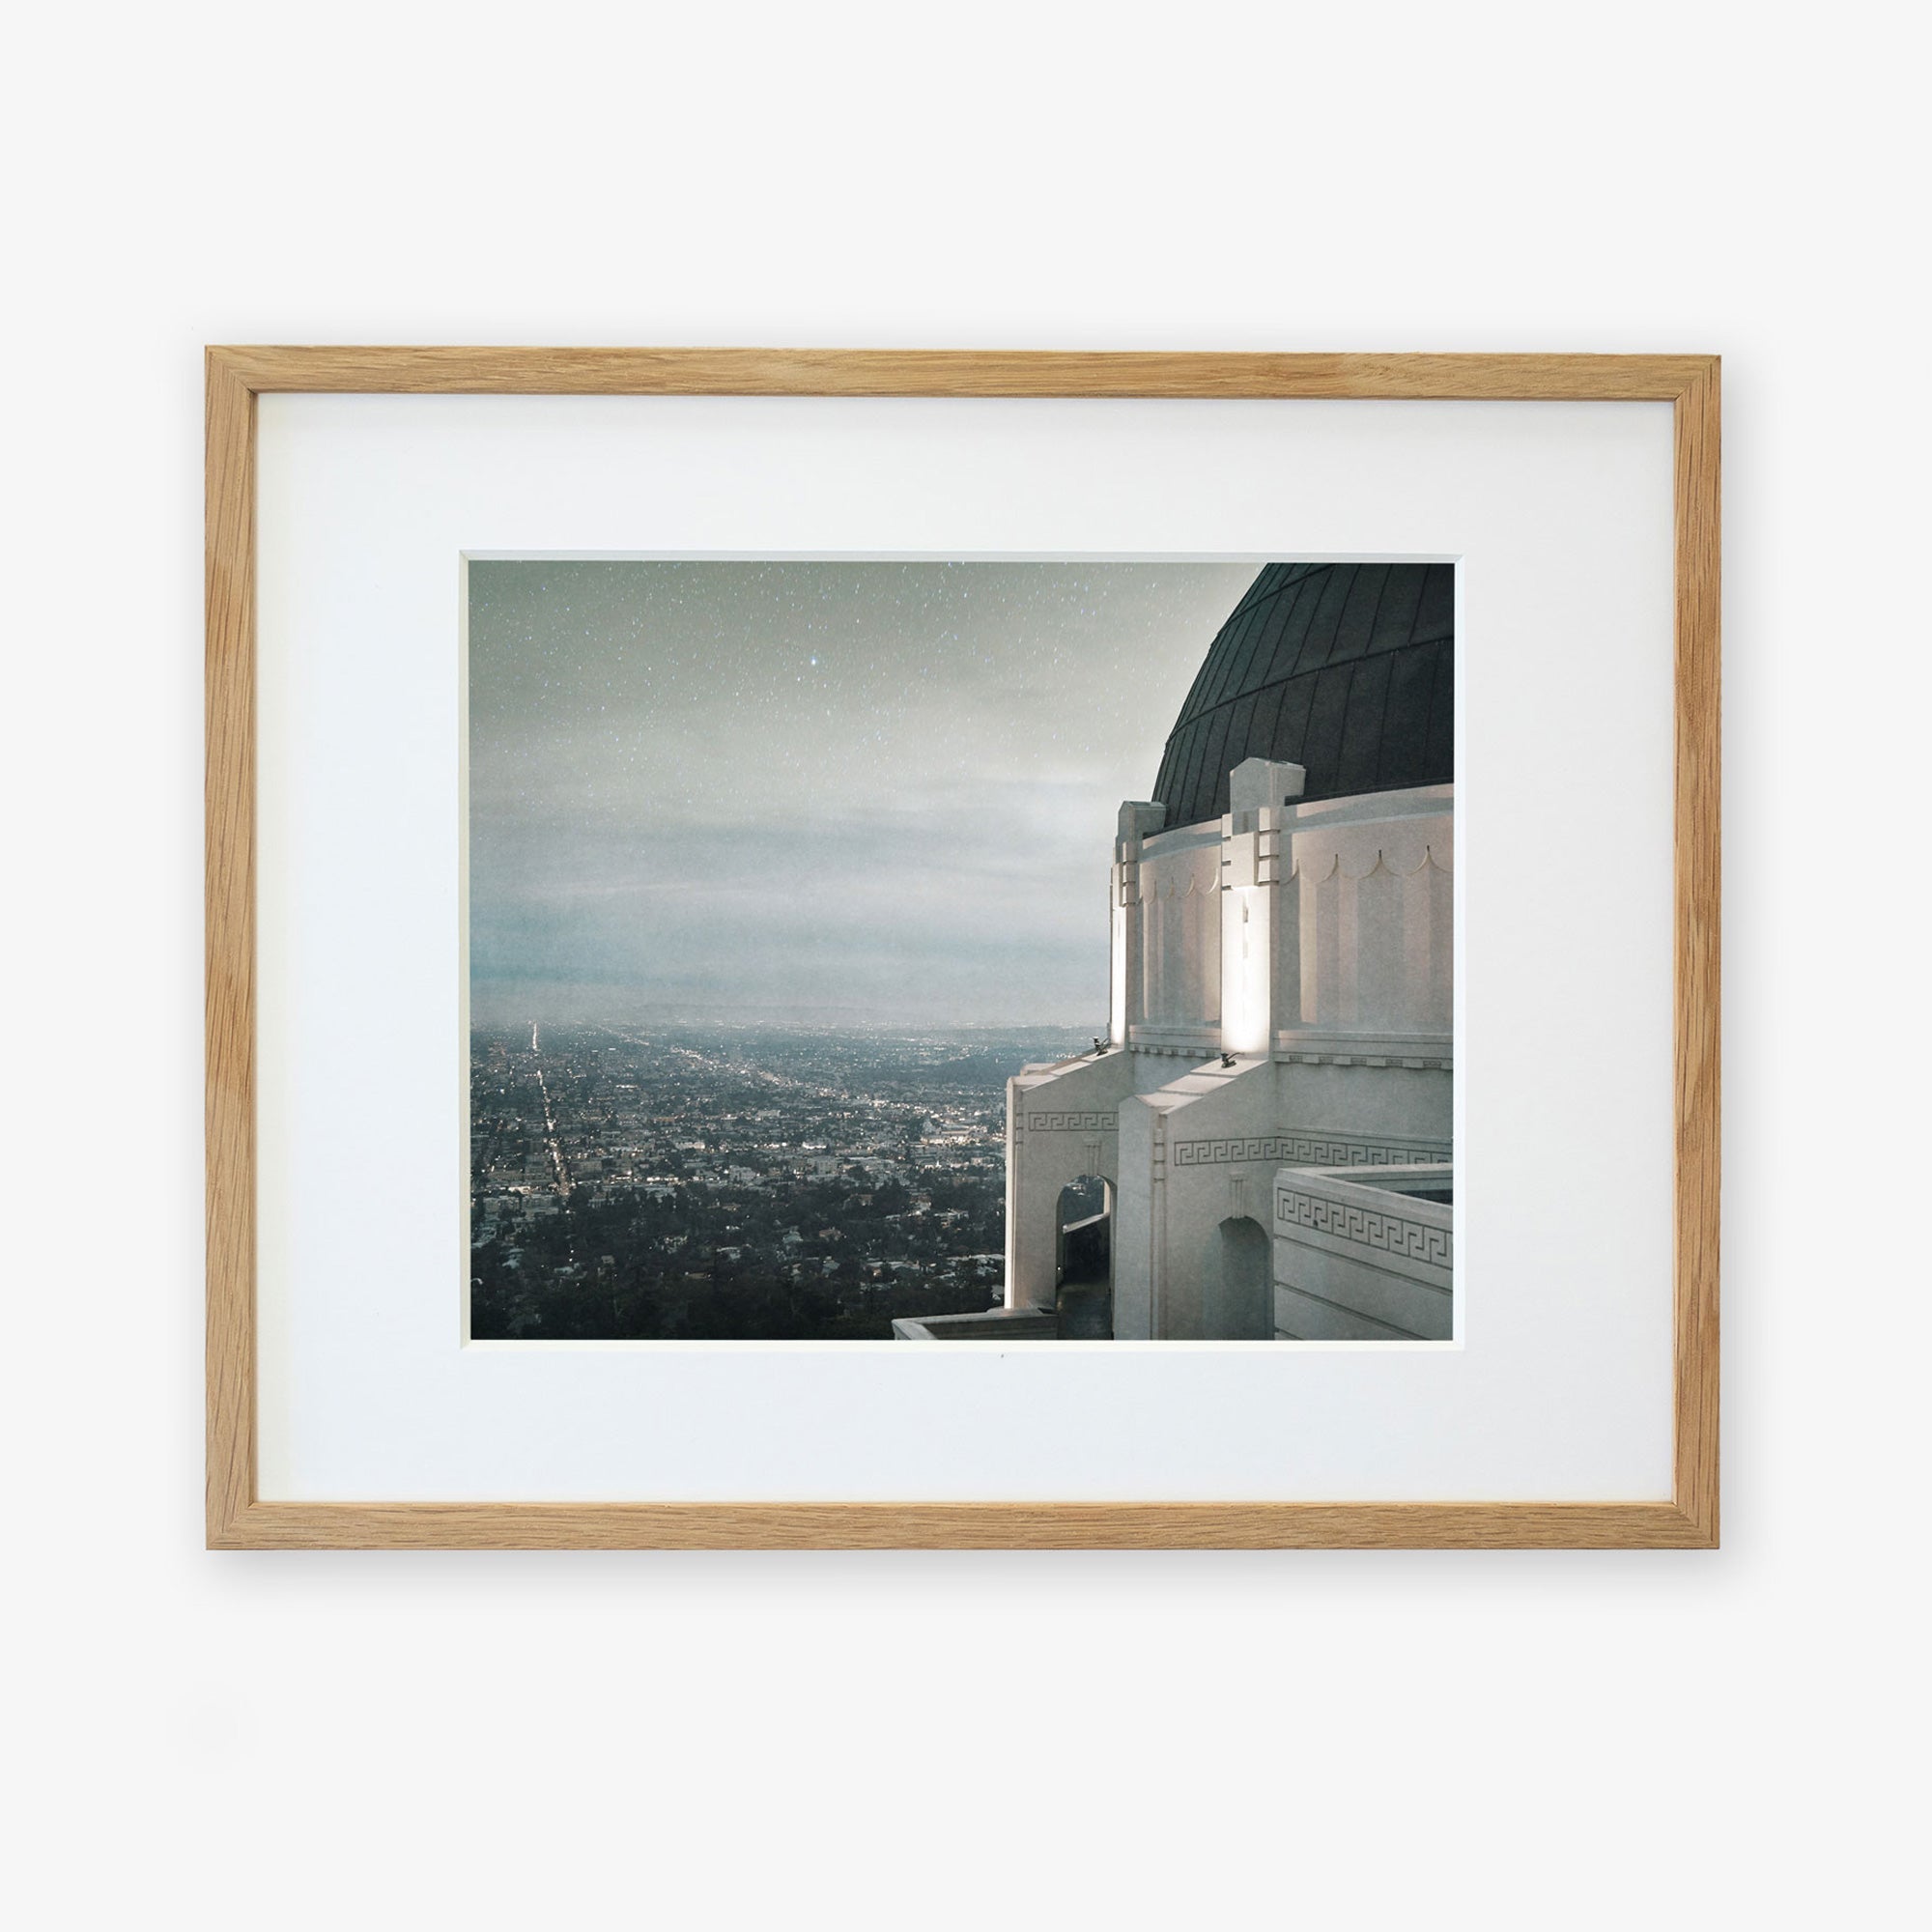 Framed archival photographic Griffith Observatory Print, 'The Sky At Night' of a Los Angeles city view at dusk viewed from a high vantage point next to the Griffith Observatory, showcasing a twinkling skyline under a soft, dark sky by Offley Green.